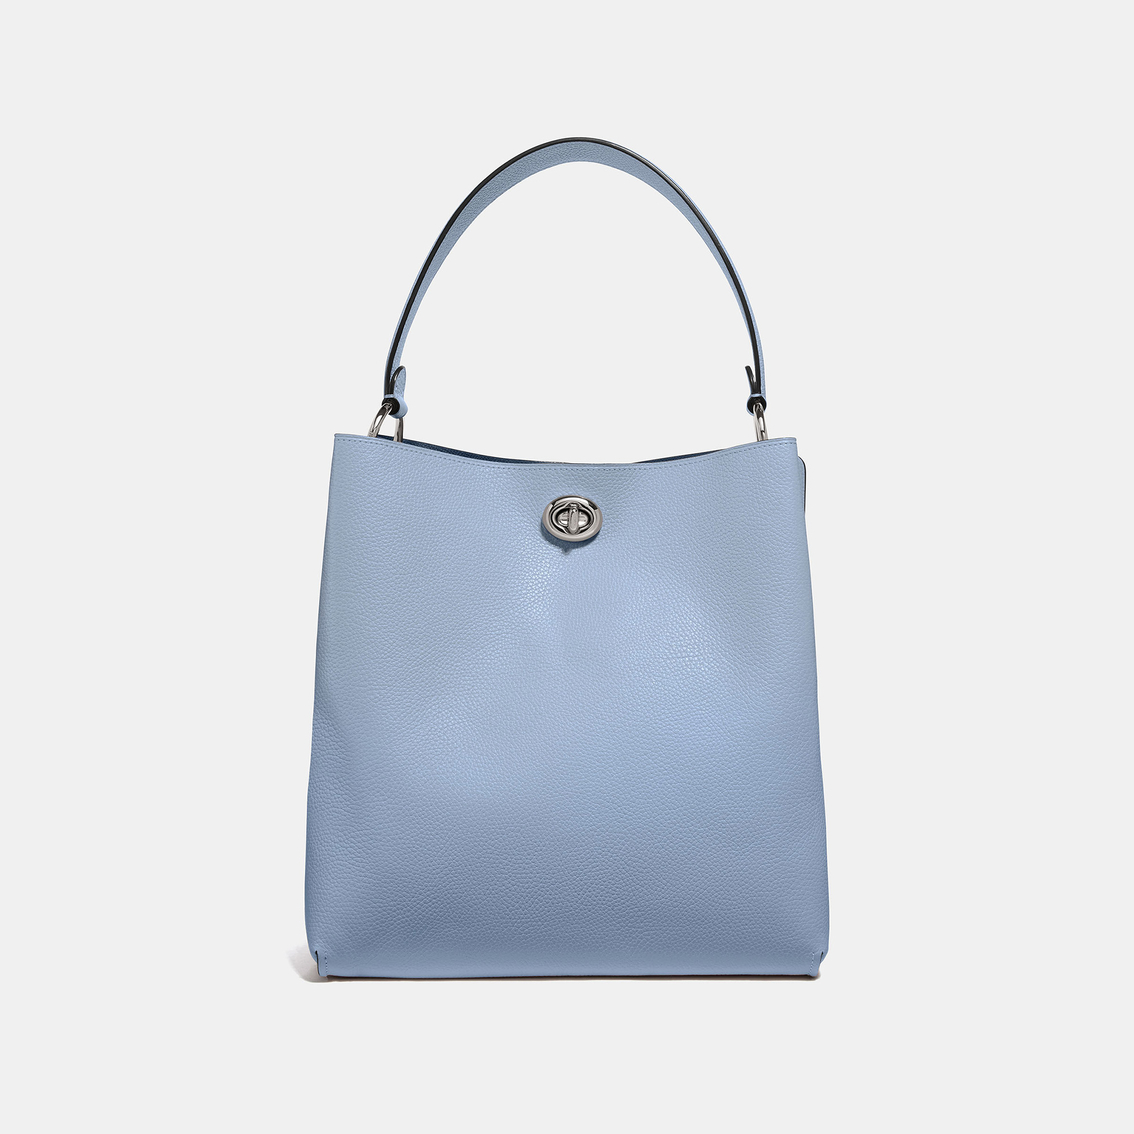 Coach Charlie Bucket Bag | Totes & Shoppers | Clothing & Accessories ...